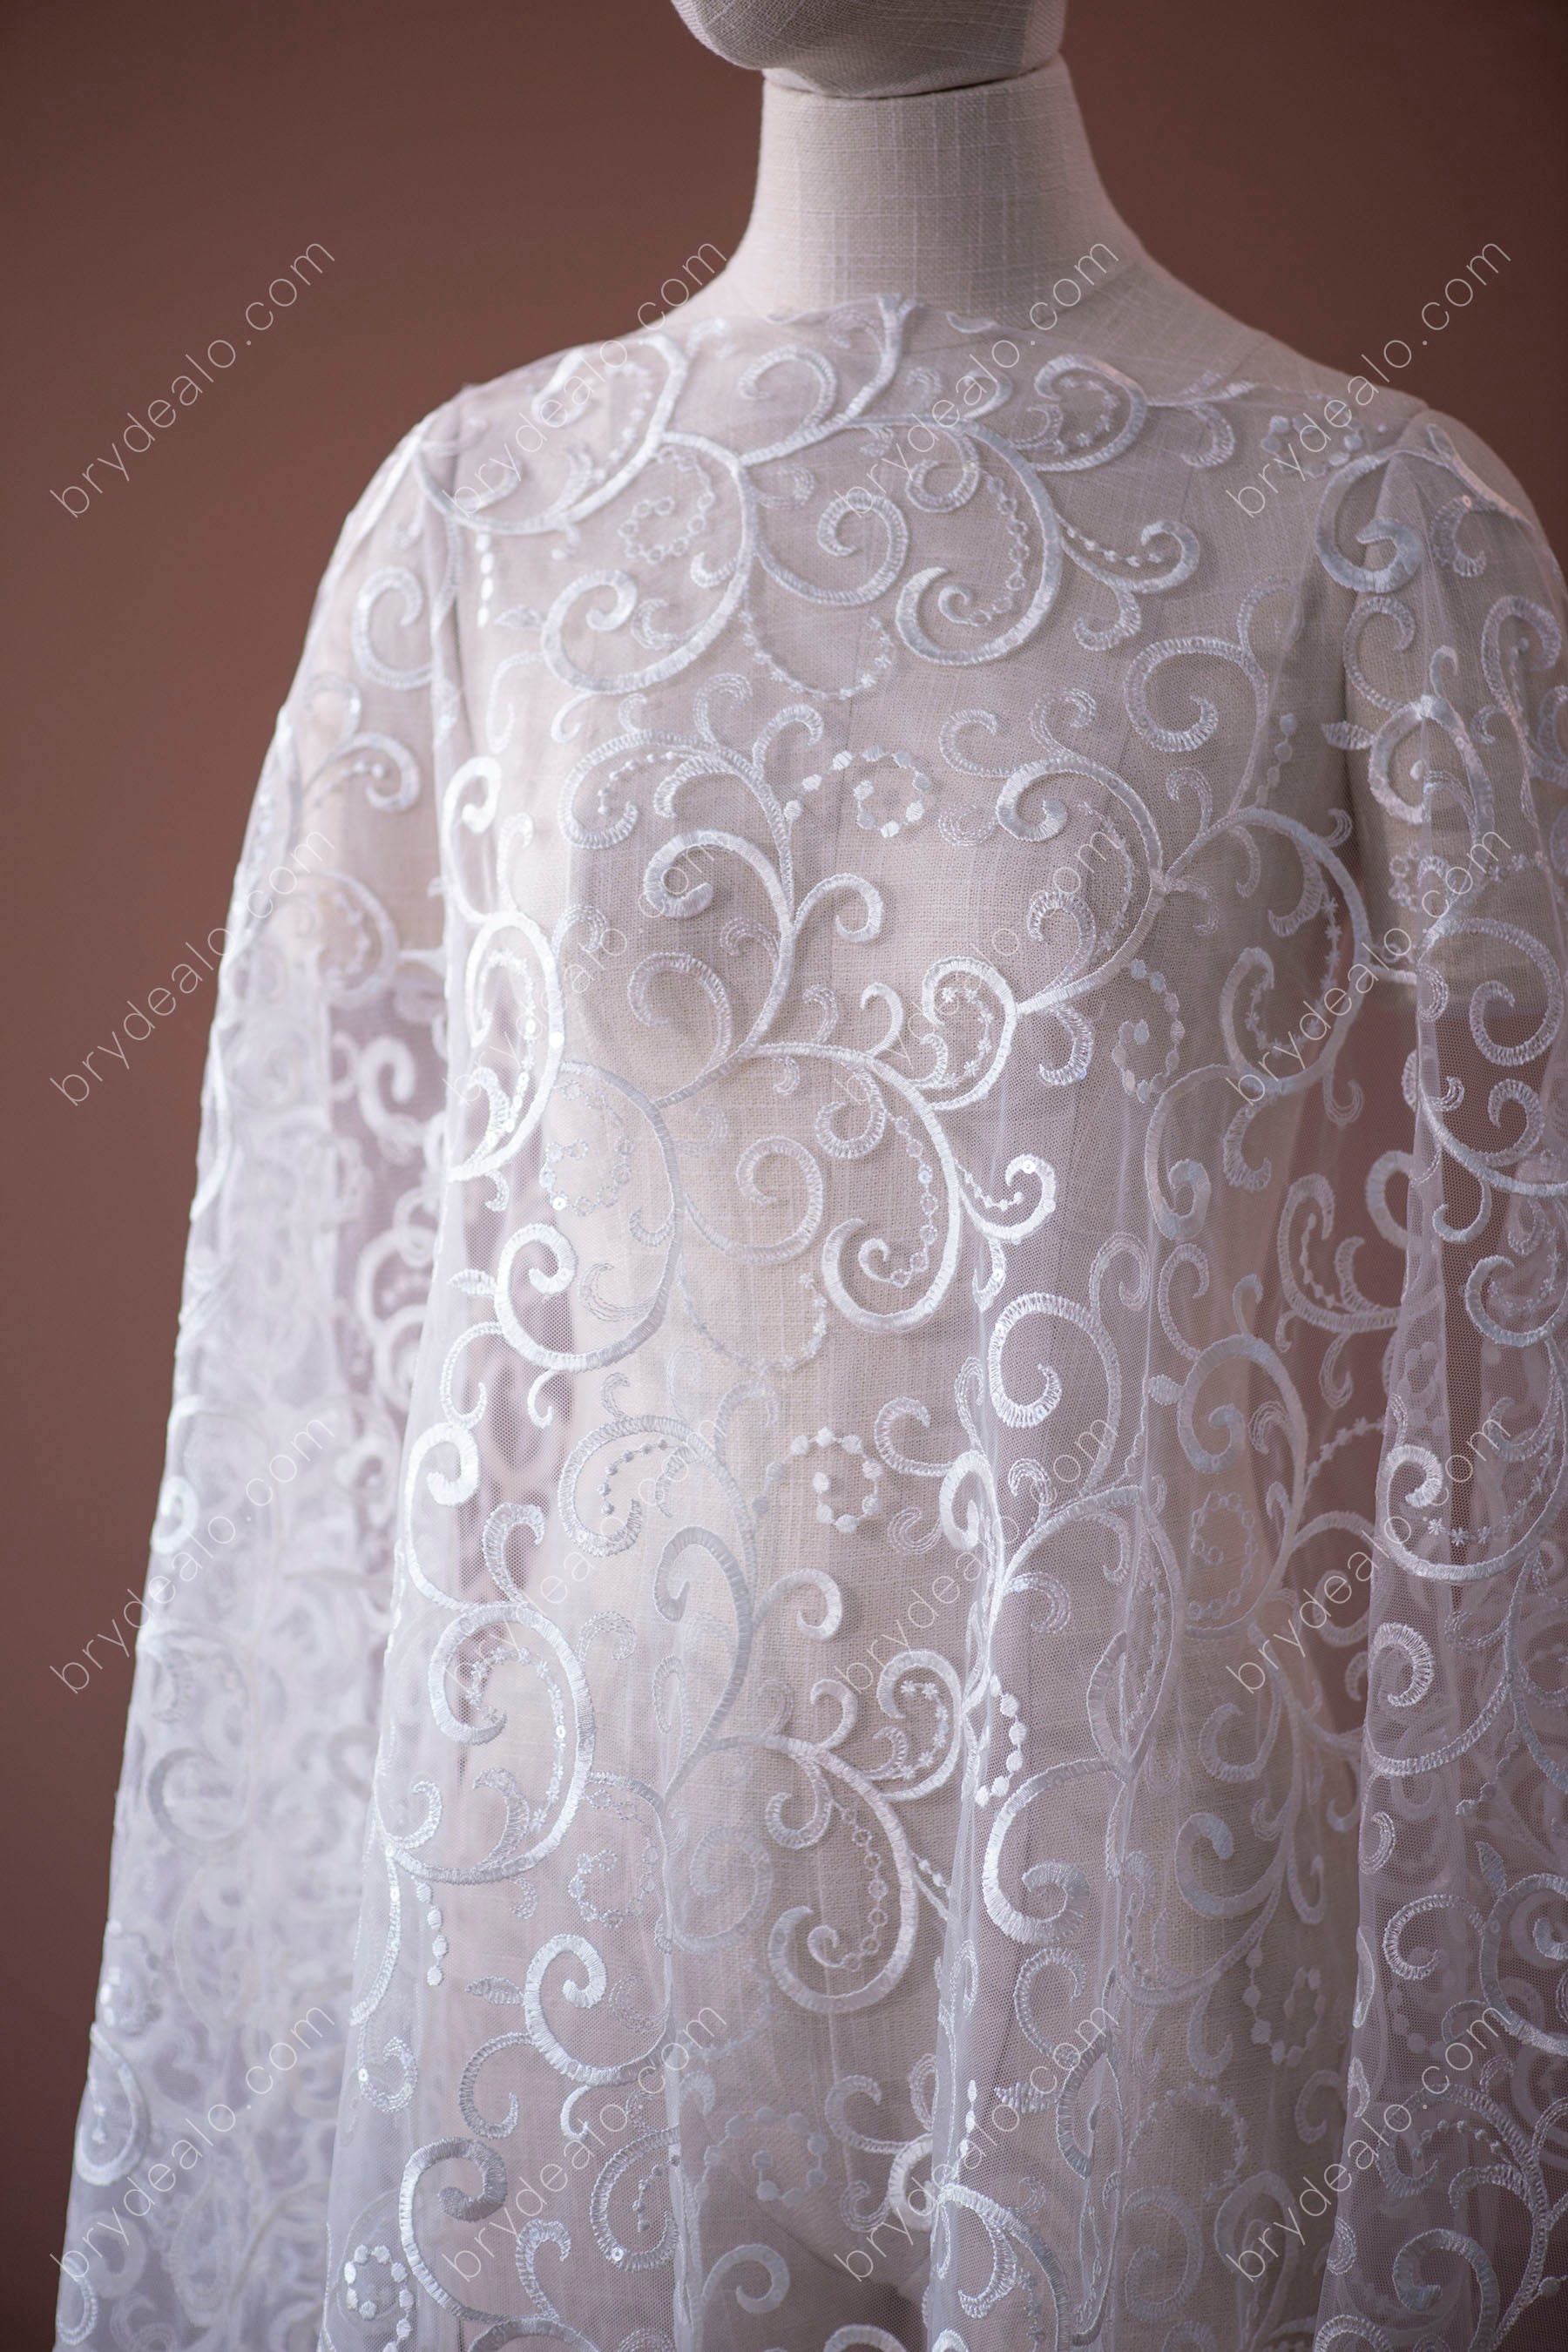 Shimmery Sequin Abstract Bridal Lace Fabric for Wholesale